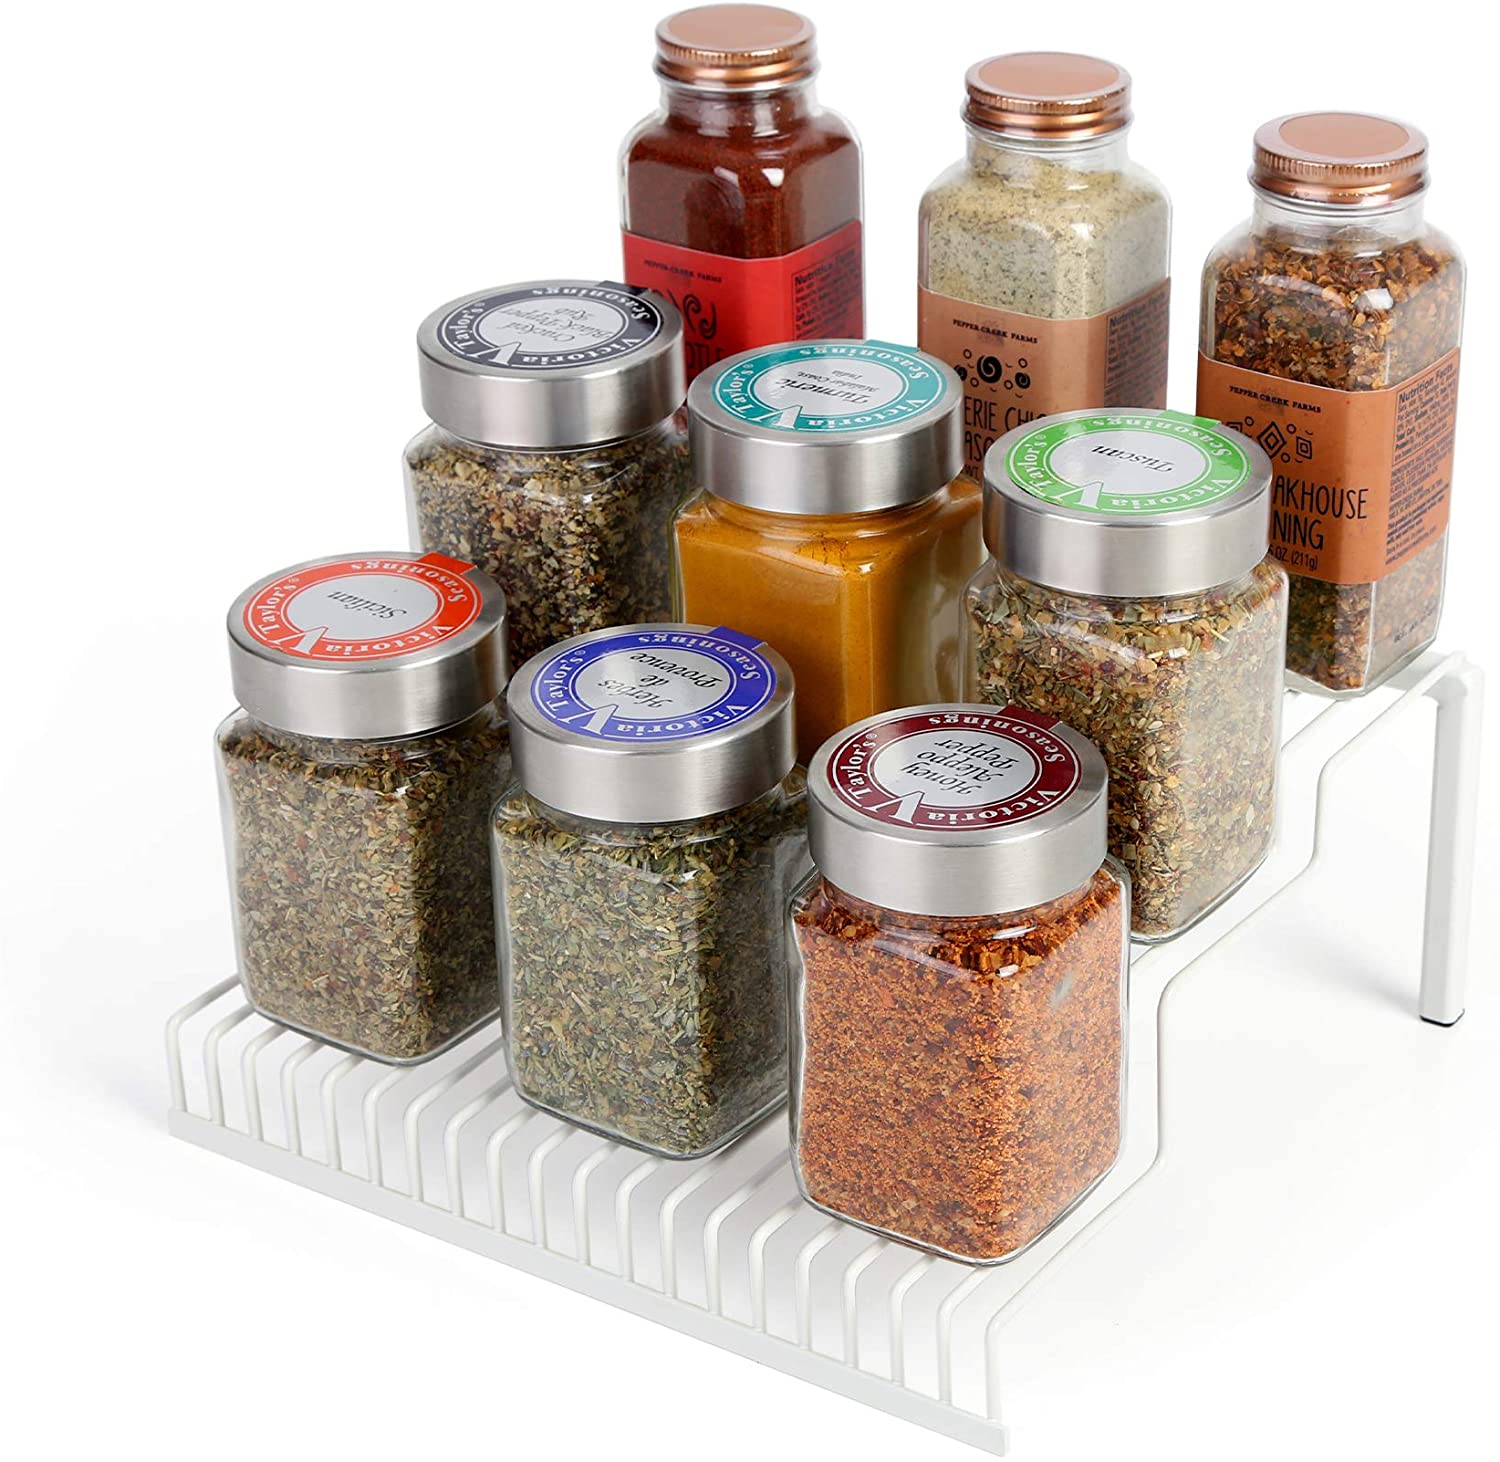 https://cdn.shopify.com/s/files/1/2393/7799/products/heavy-duty-3-tier-spice-rack-smart-design-kitchen-8426118-incrementing-number-551765.jpg?v=1679342217